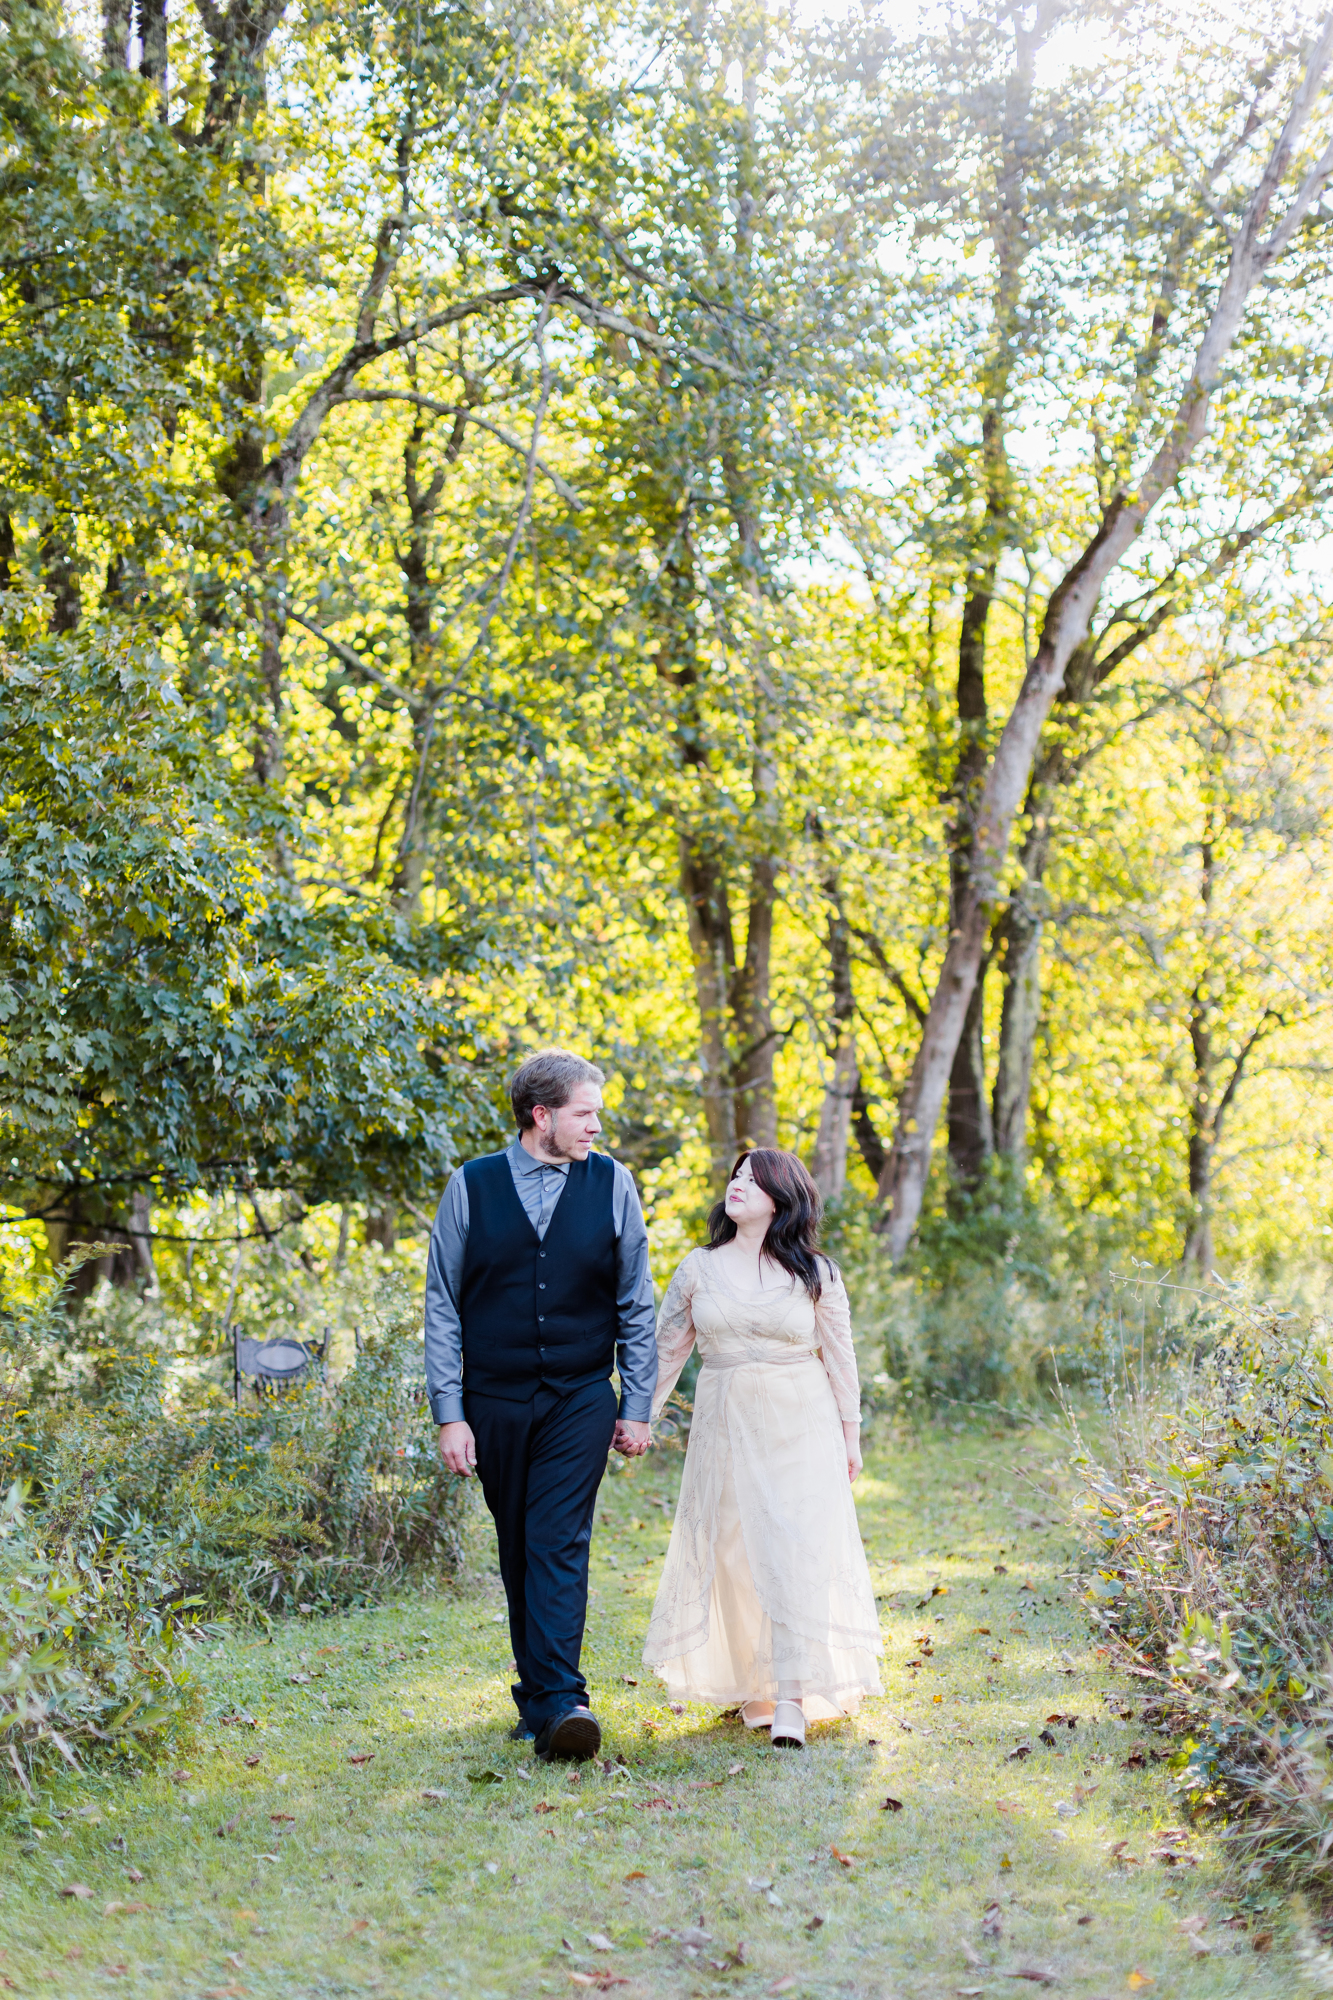 Stylish Upstate New York Elopement Photos at Saugerties in Fall